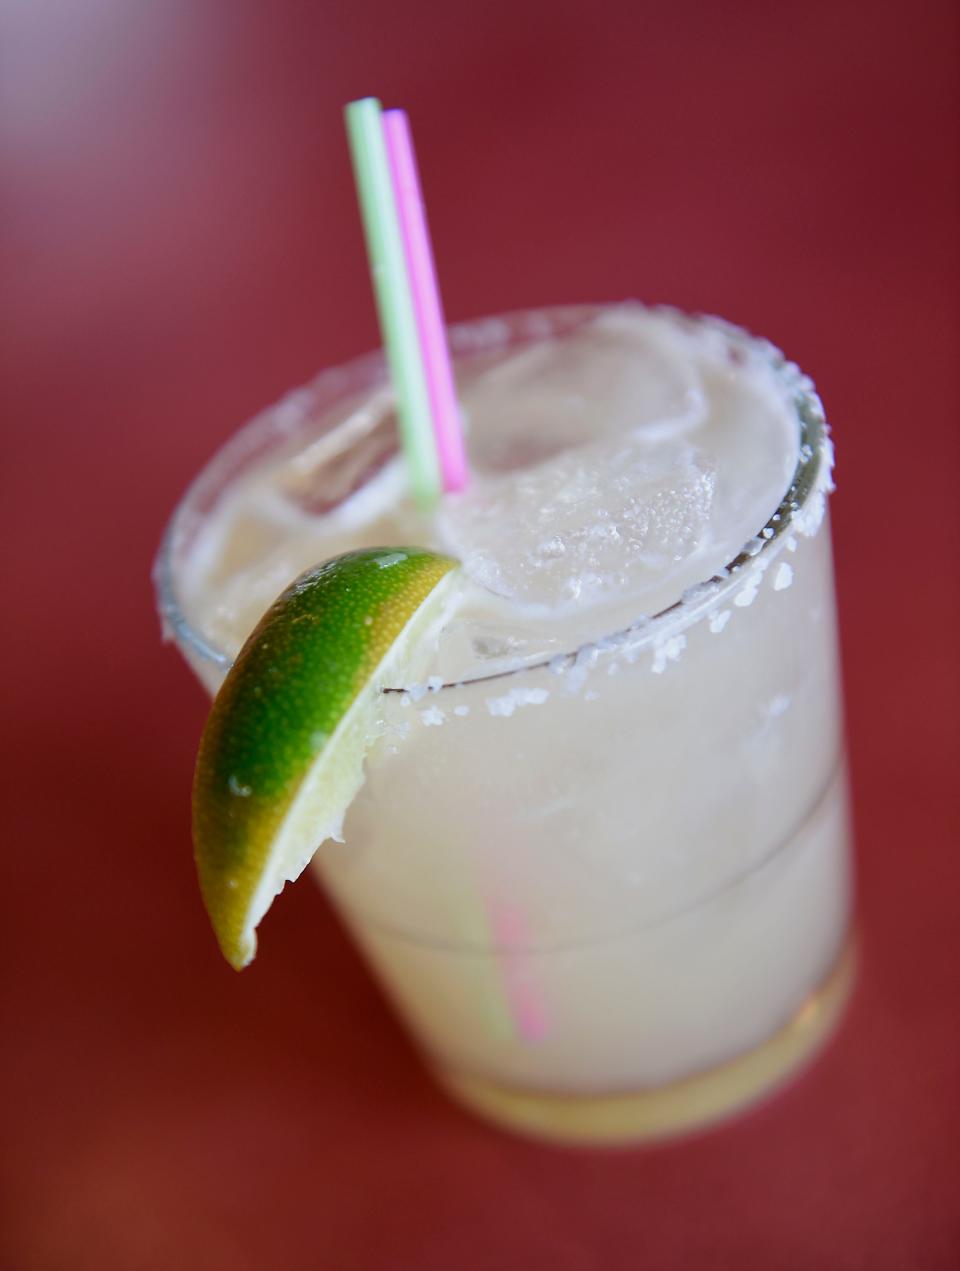 Great margaritas start with great tequila.